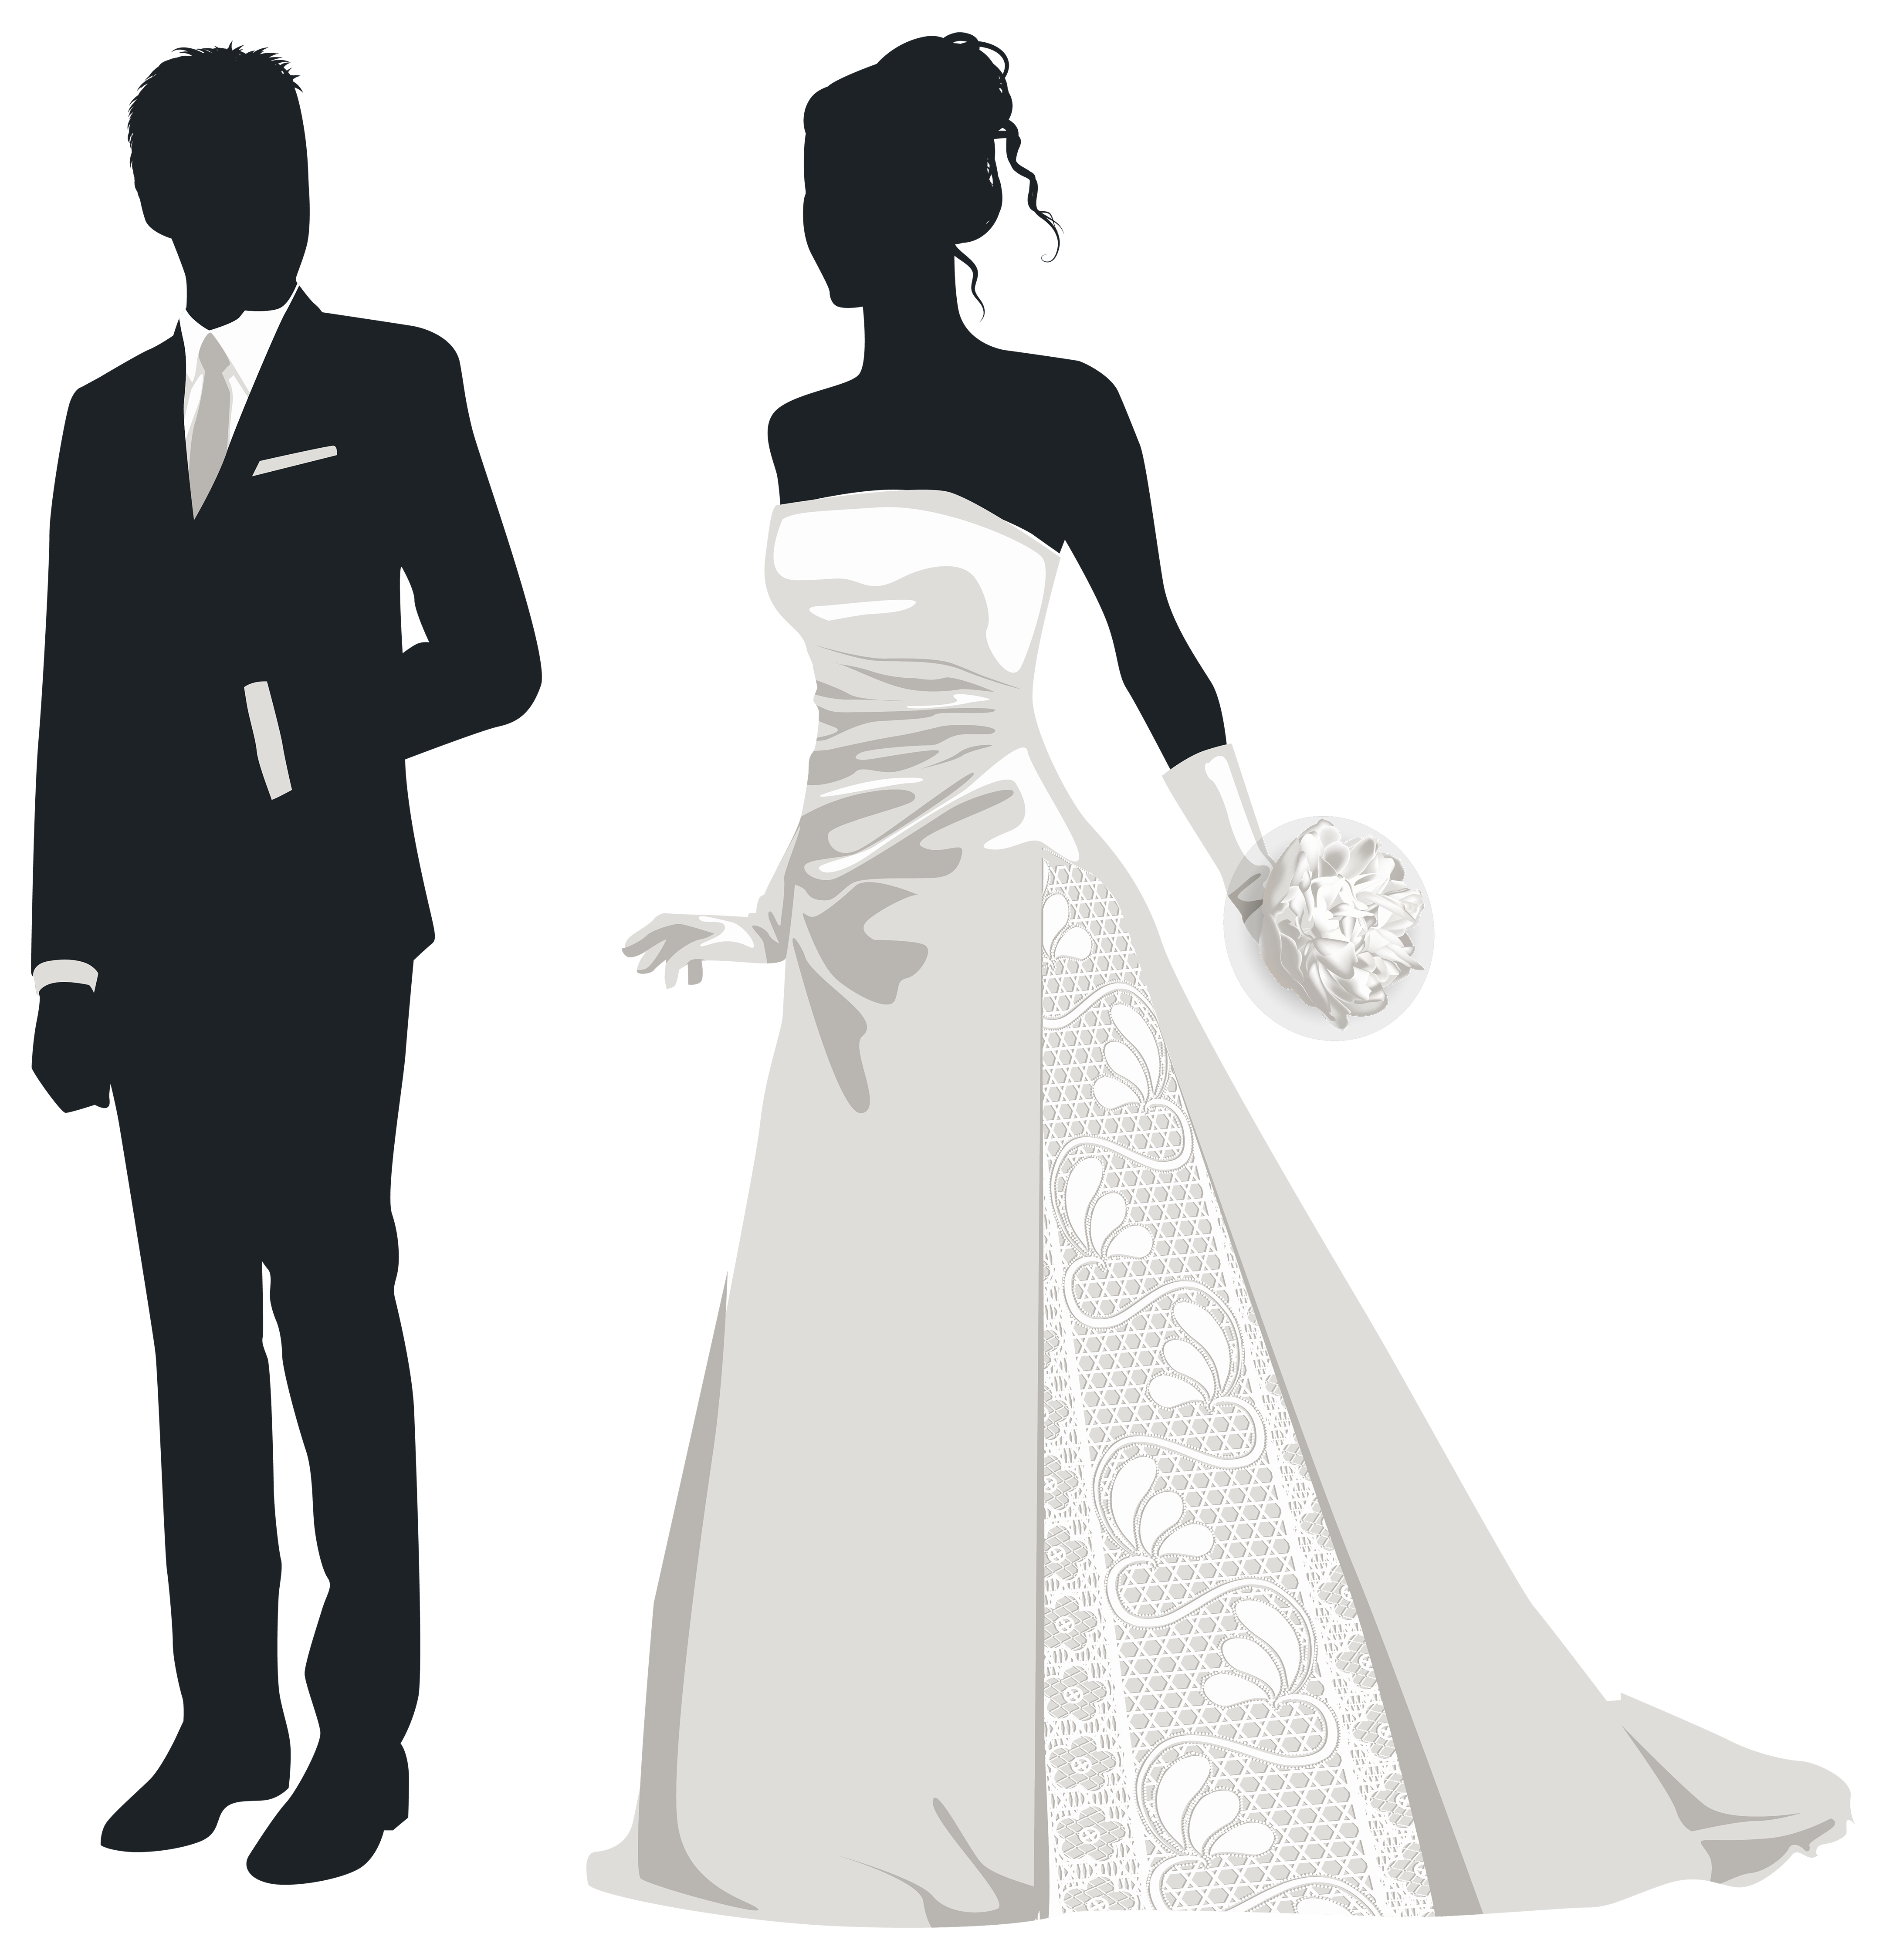 free bride and groom silhouette clip art